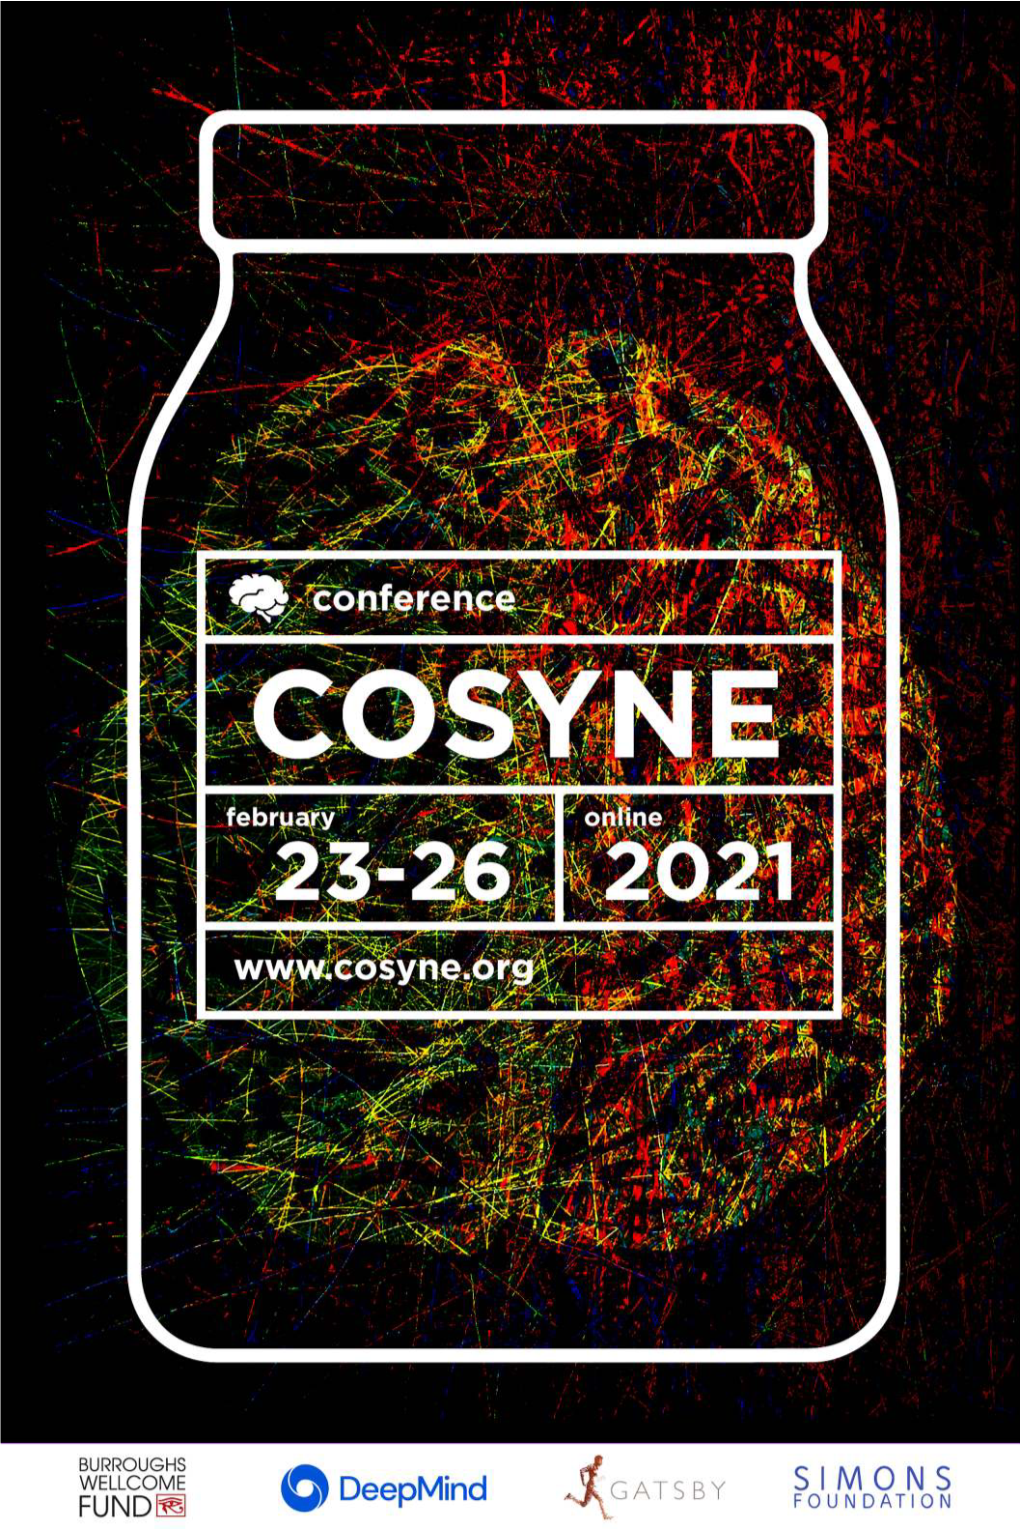 About Cosyne